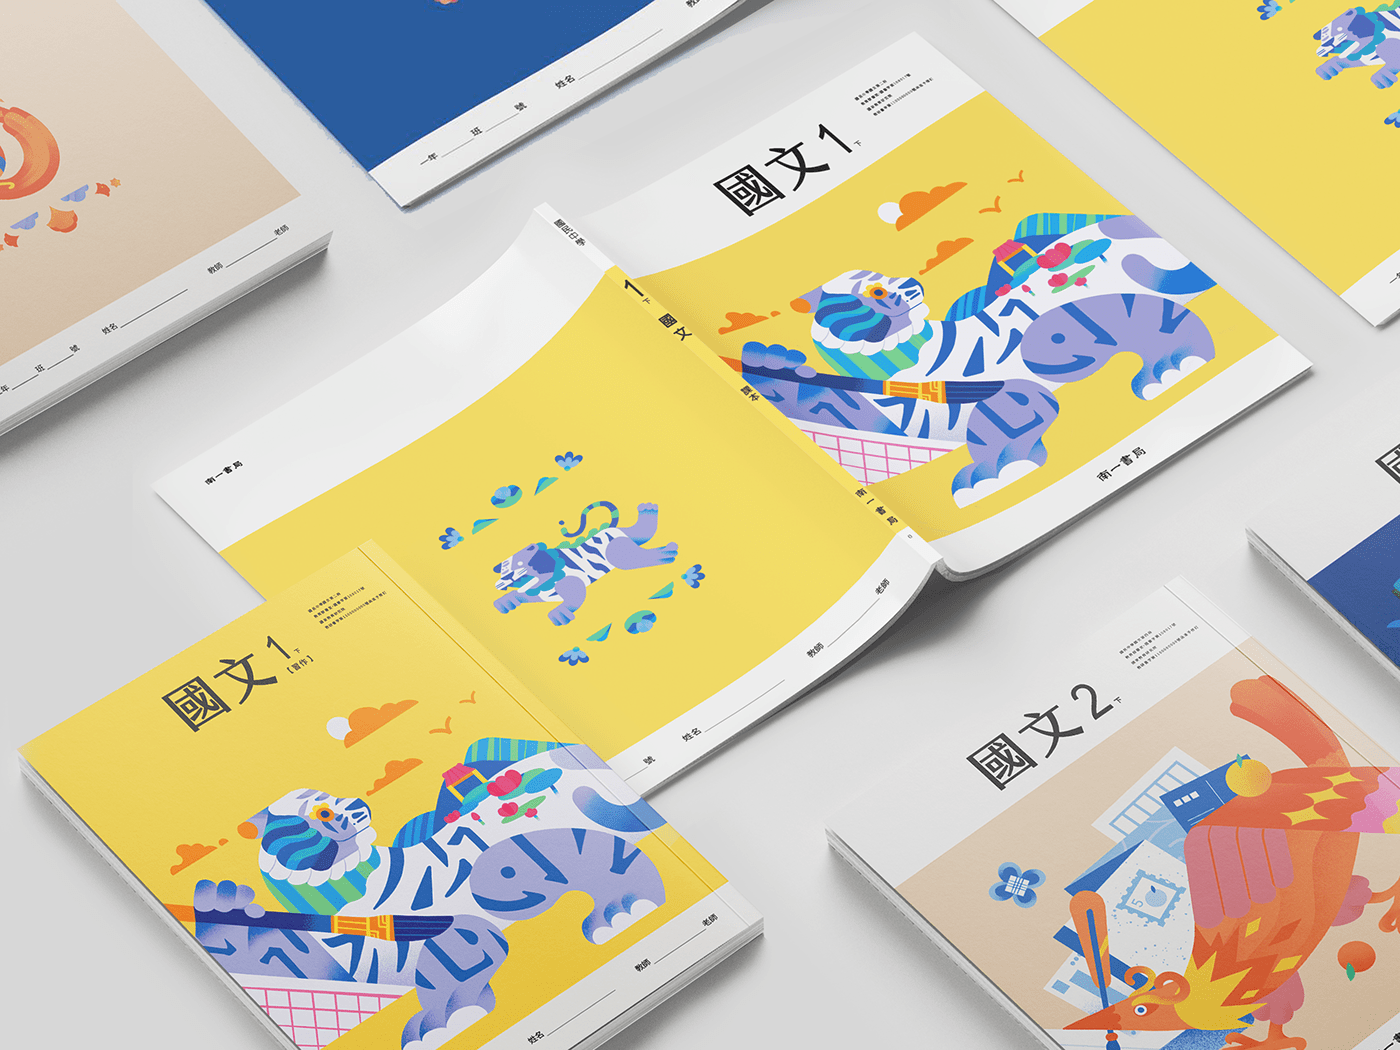 Textbook Design chinese bookcoverdesign aestheticell mandarin pattern design  Patterns illustrations Procreate textbook cover